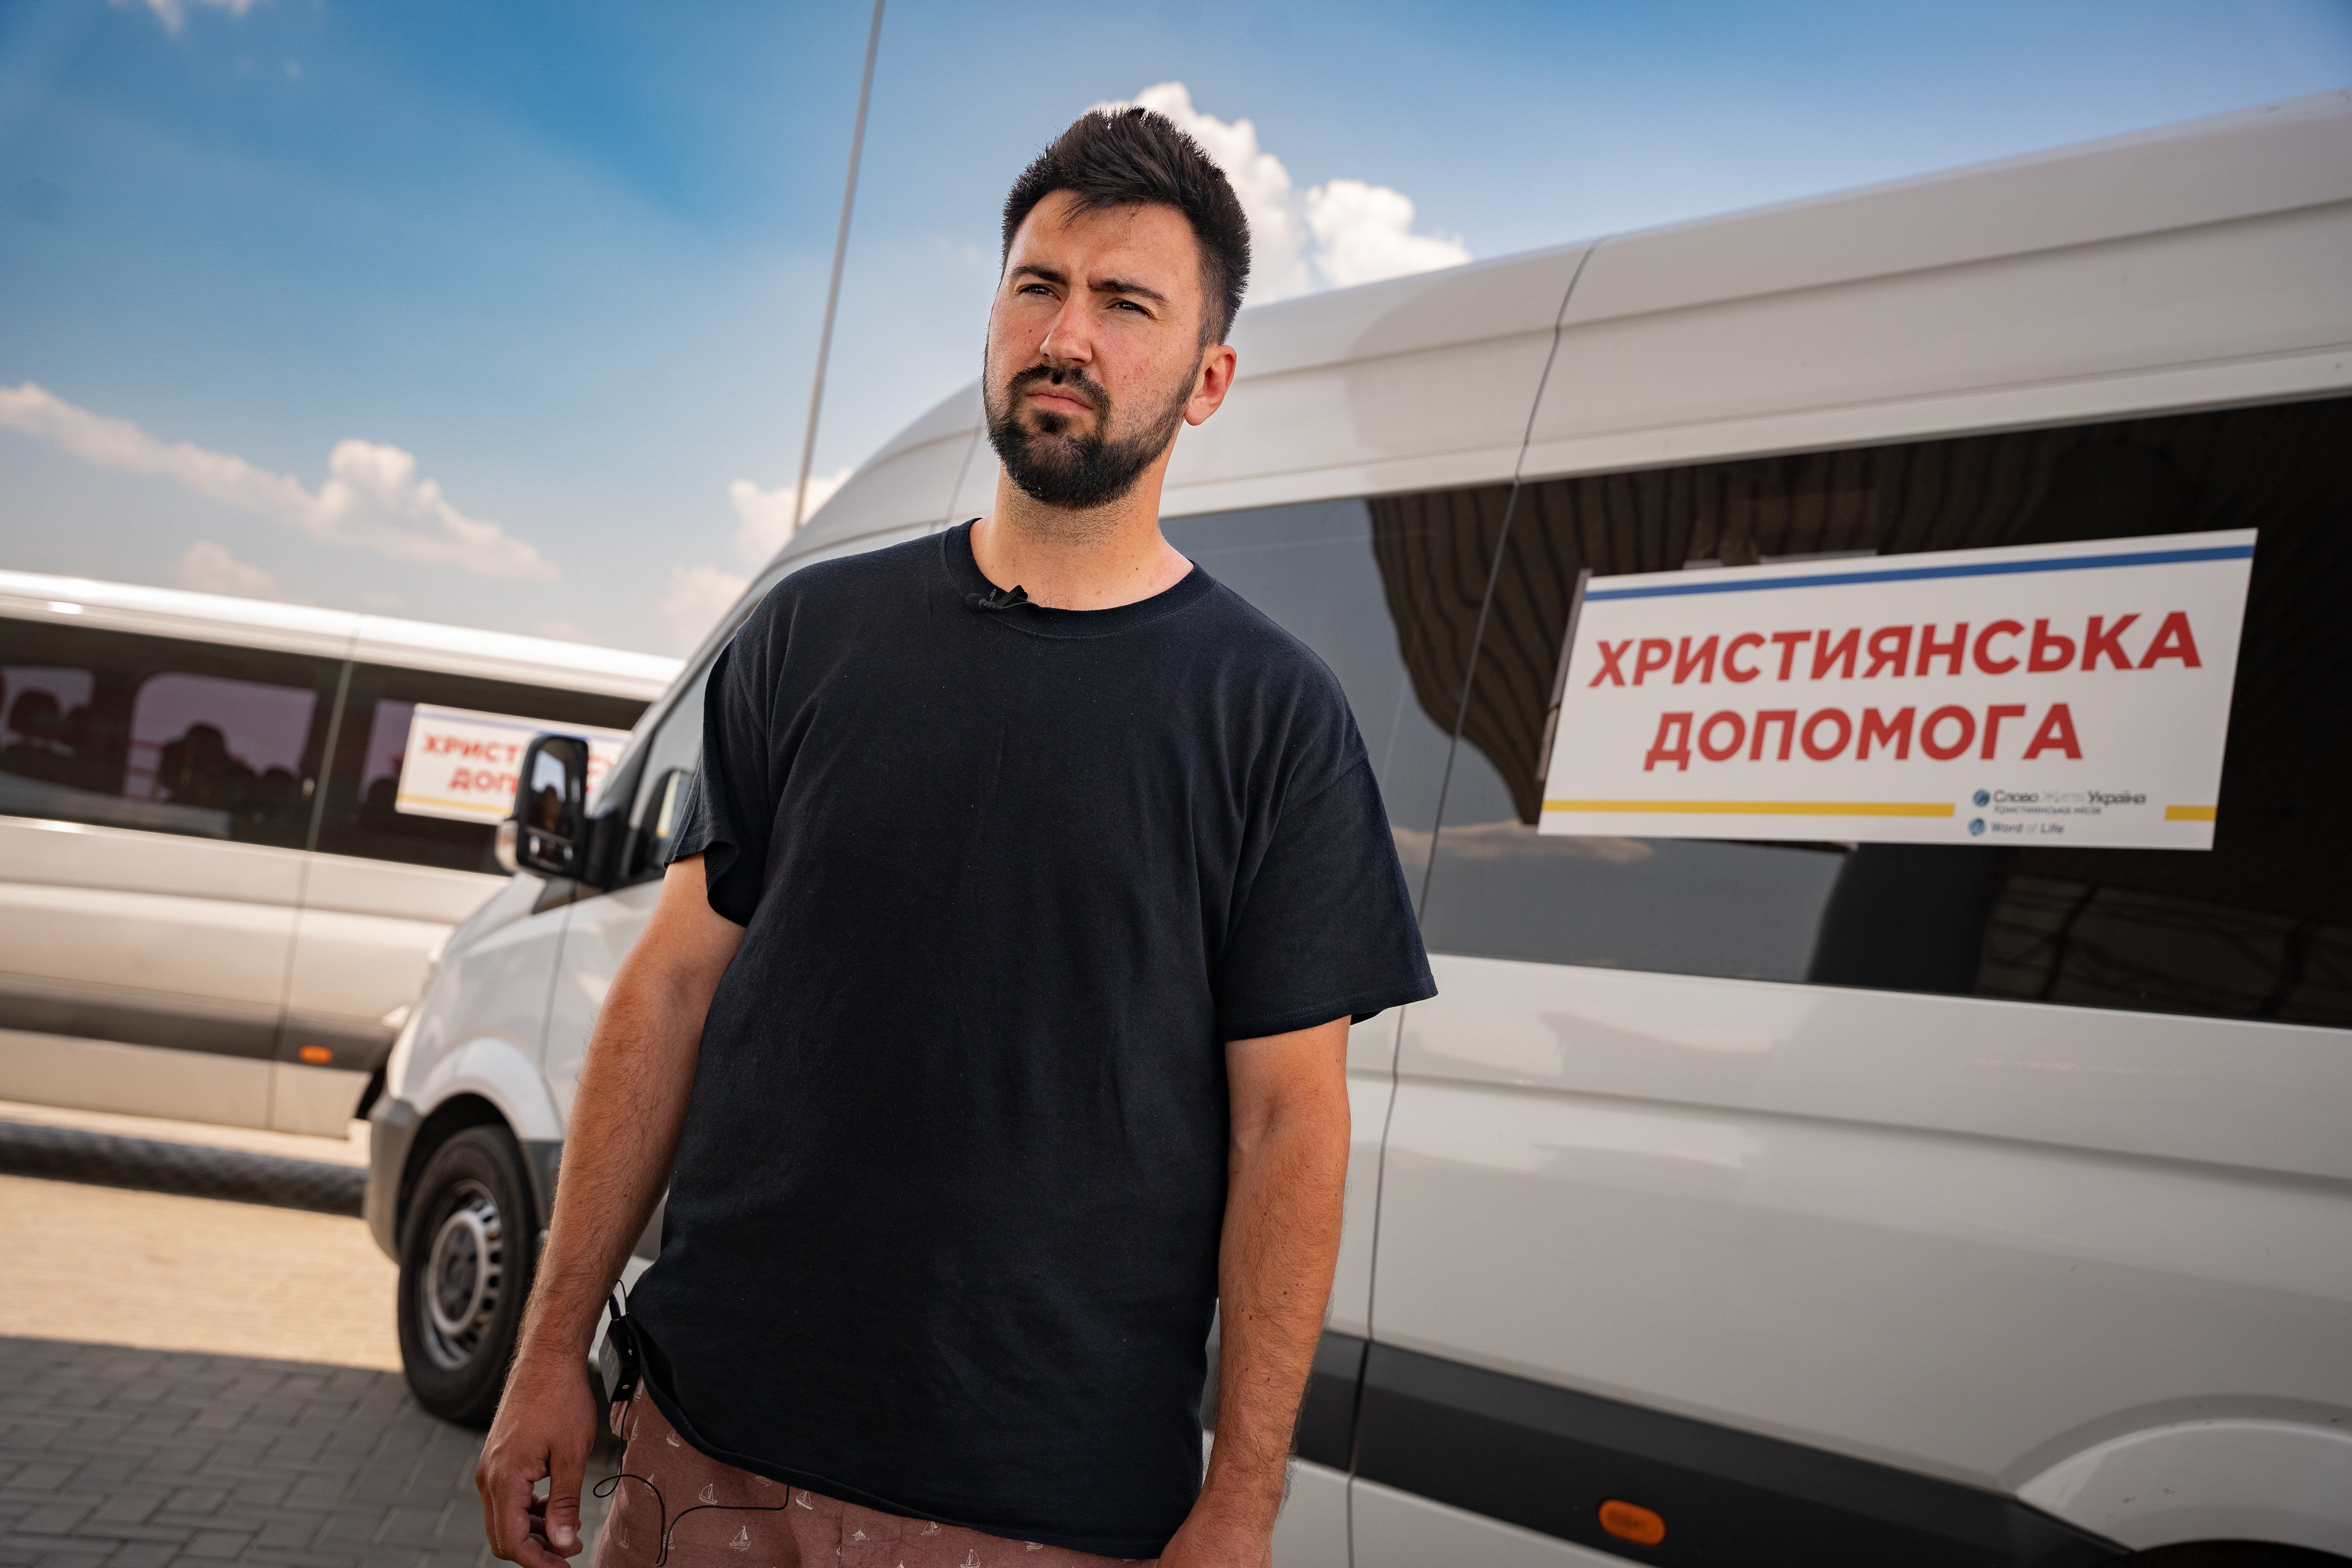 Serhiy, a volunteer who has been bombed and shelled rescuing civilians across Ukraine